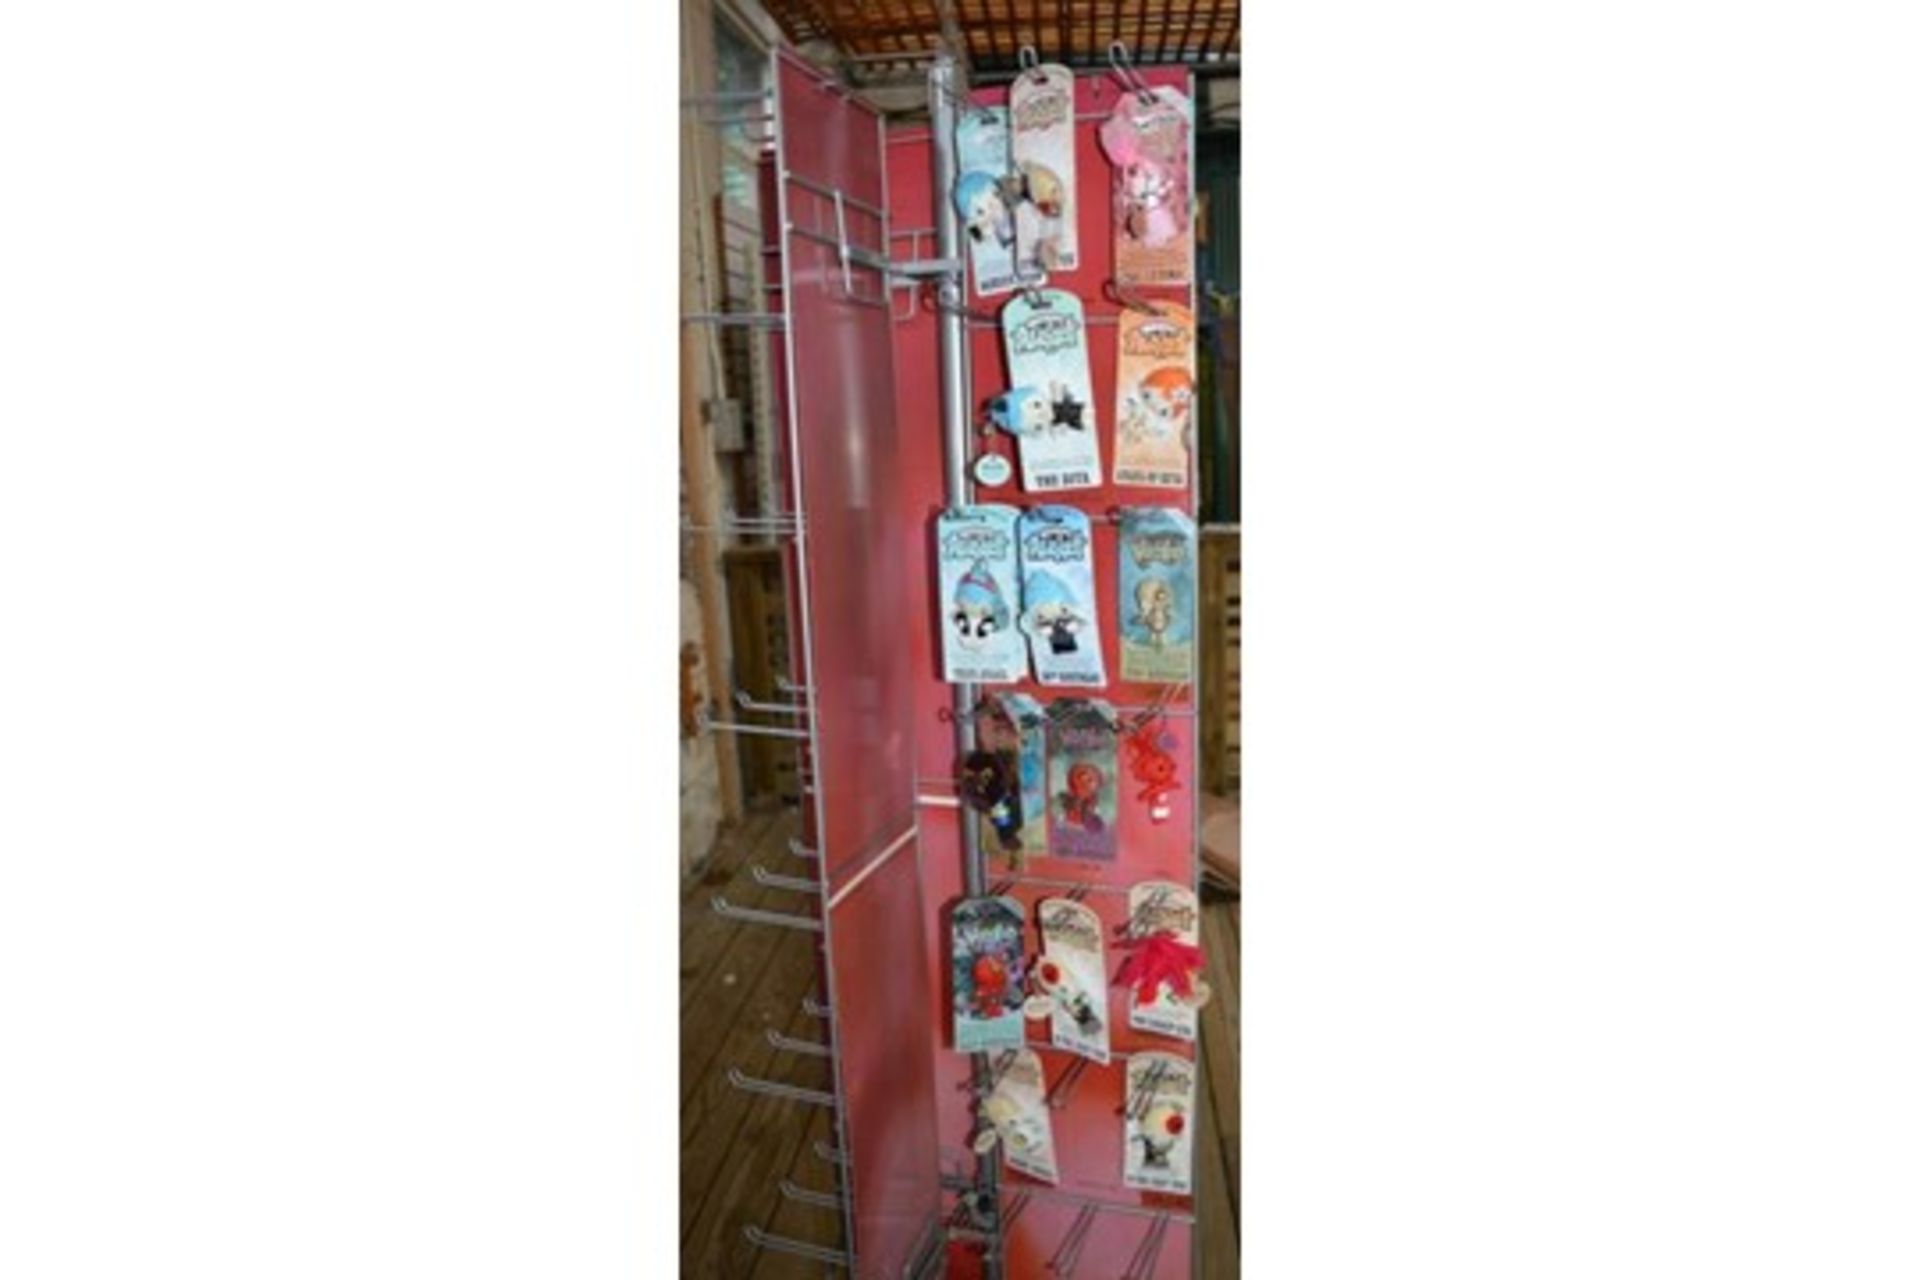 27 x Retail Carousel Display Stands With Approximately 2,800 Items of Resale Stock - Includes - Image 8 of 61